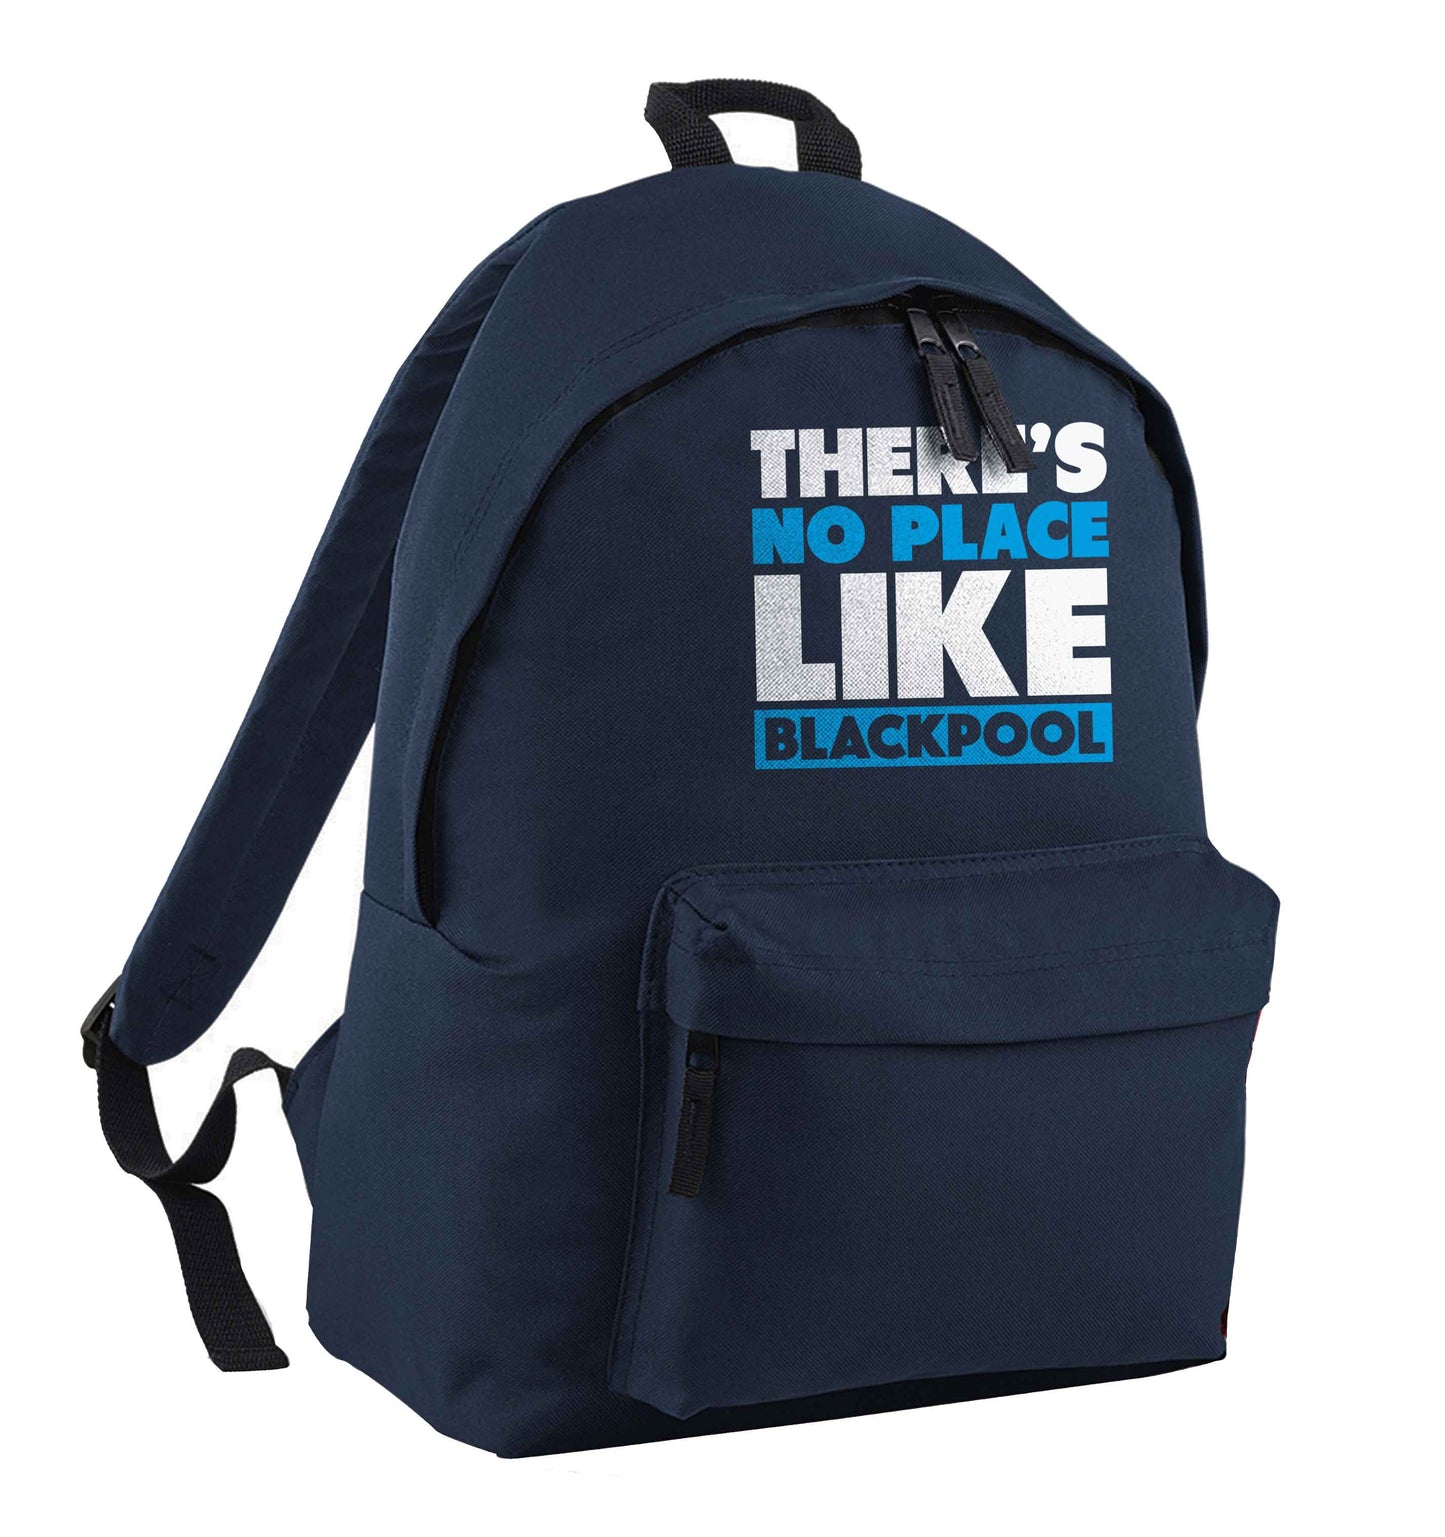 There's no place like Blackpool navy adults backpack